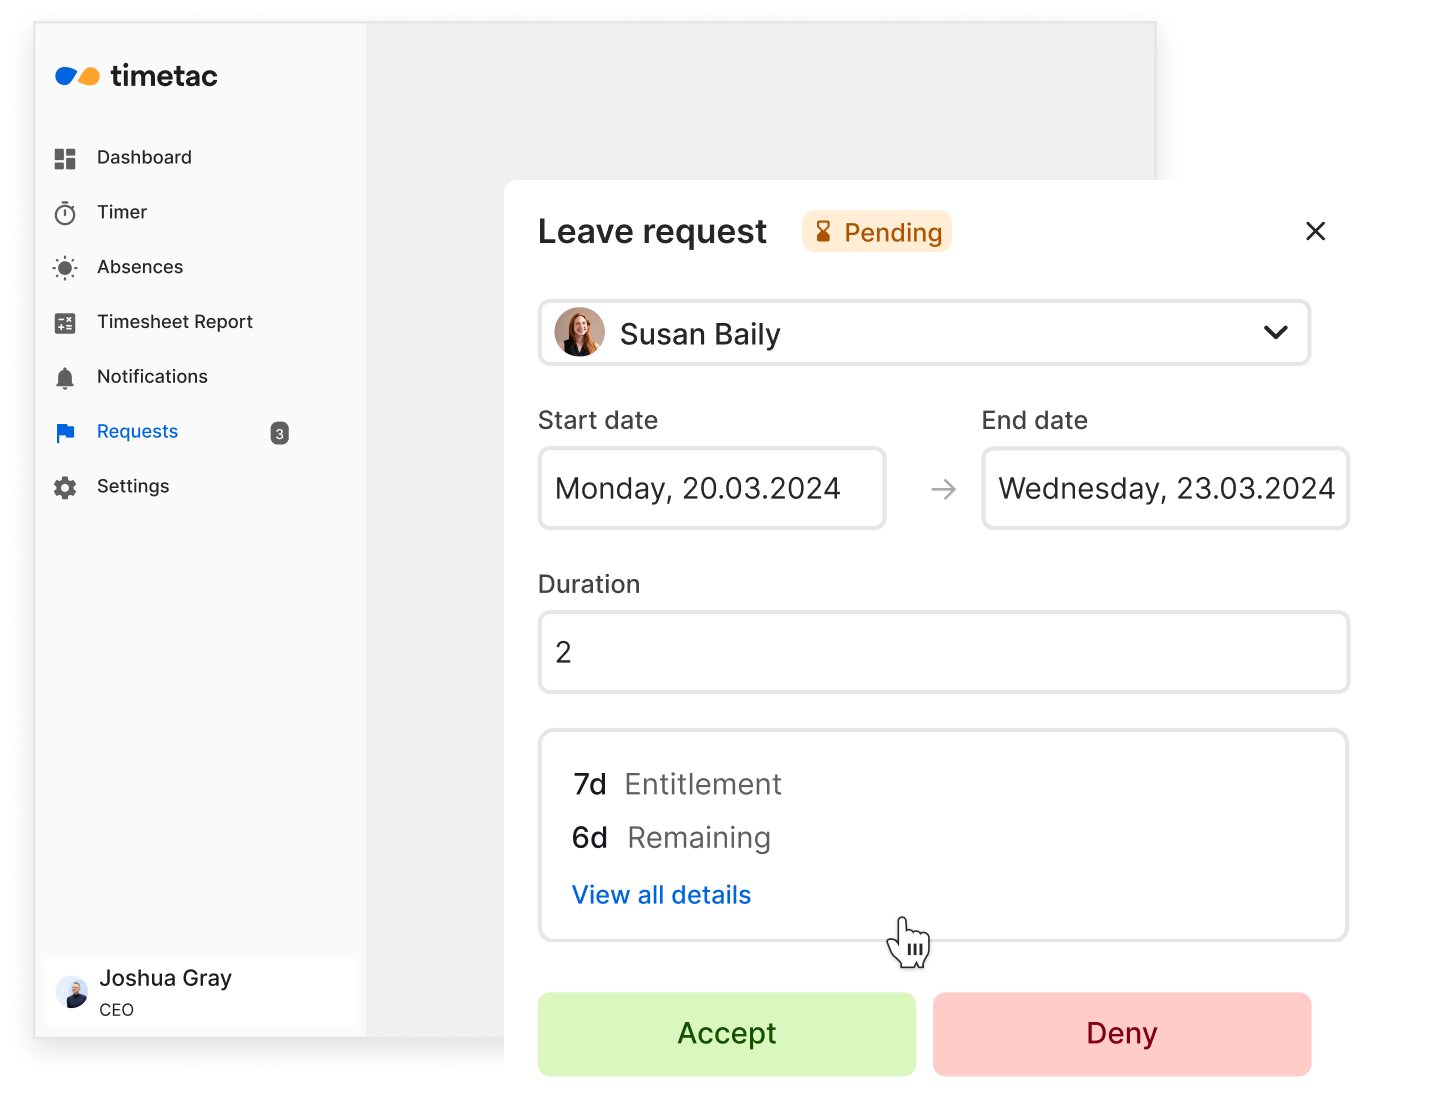 User interface screenshot of Leave request